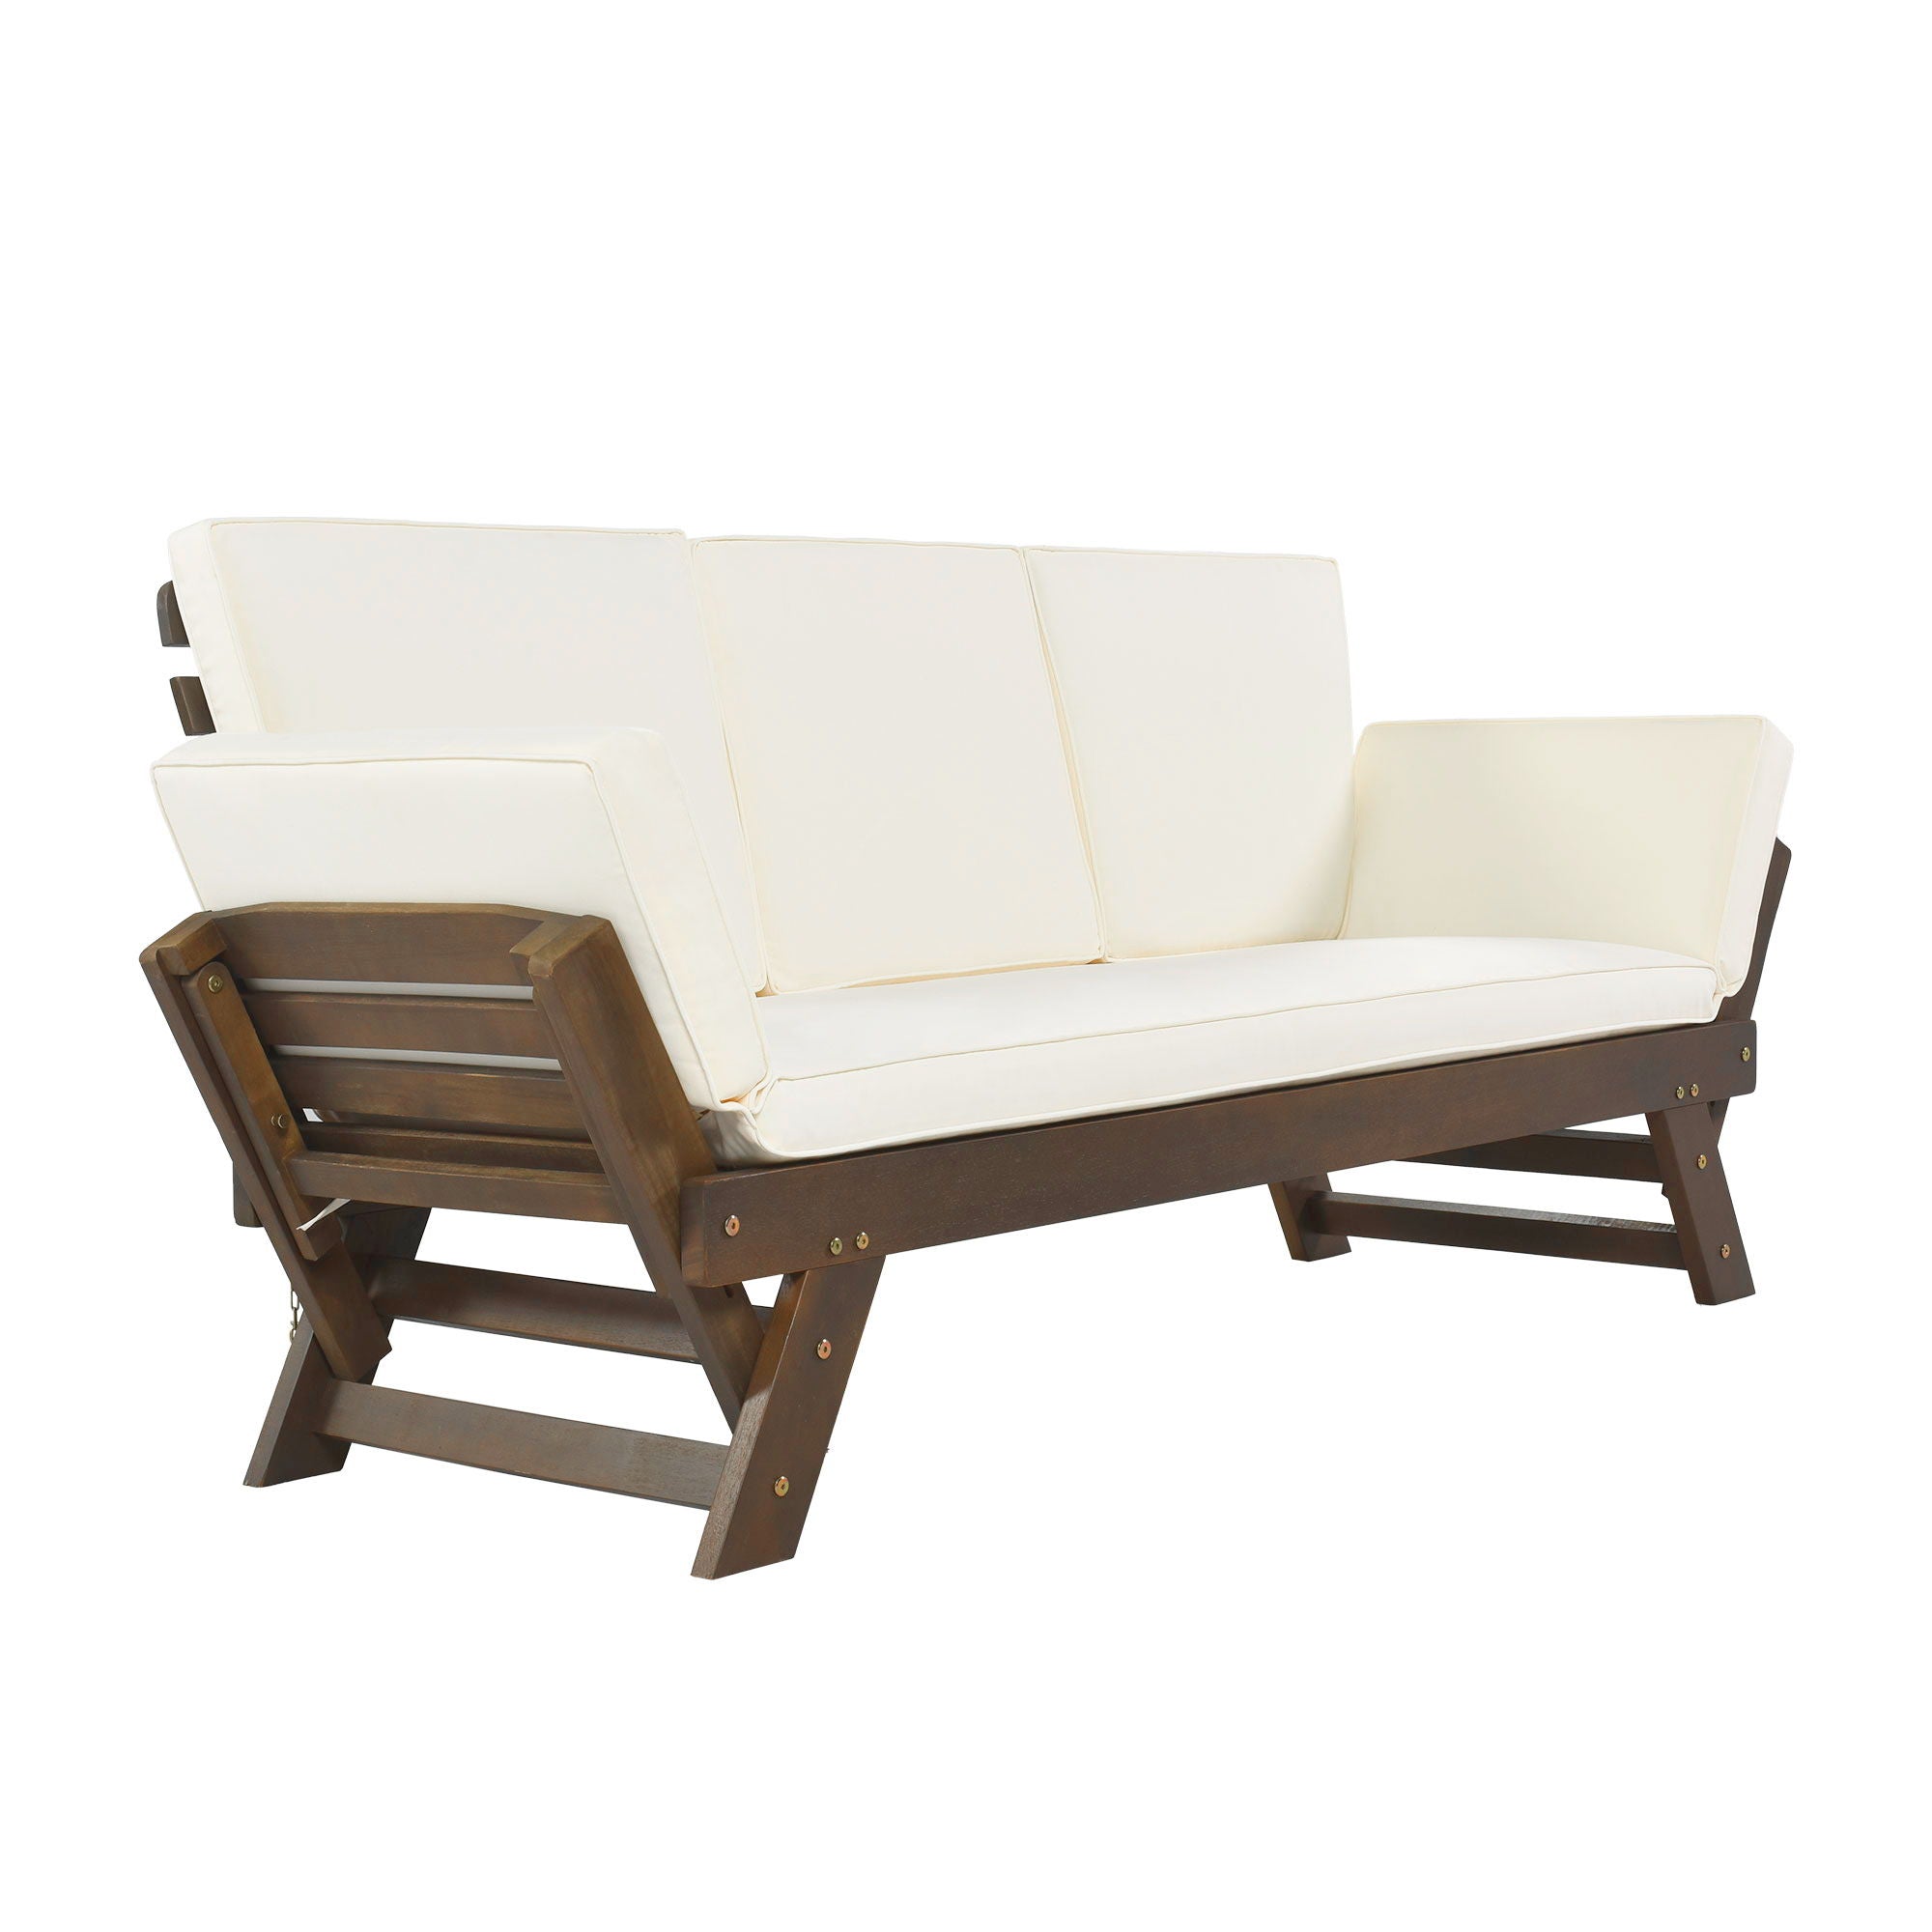 Topmax Outdoor Adjustable Patio Wooden Daybed Sofa Chaise Lounge With Cushions For Small Places - Brown / Beige